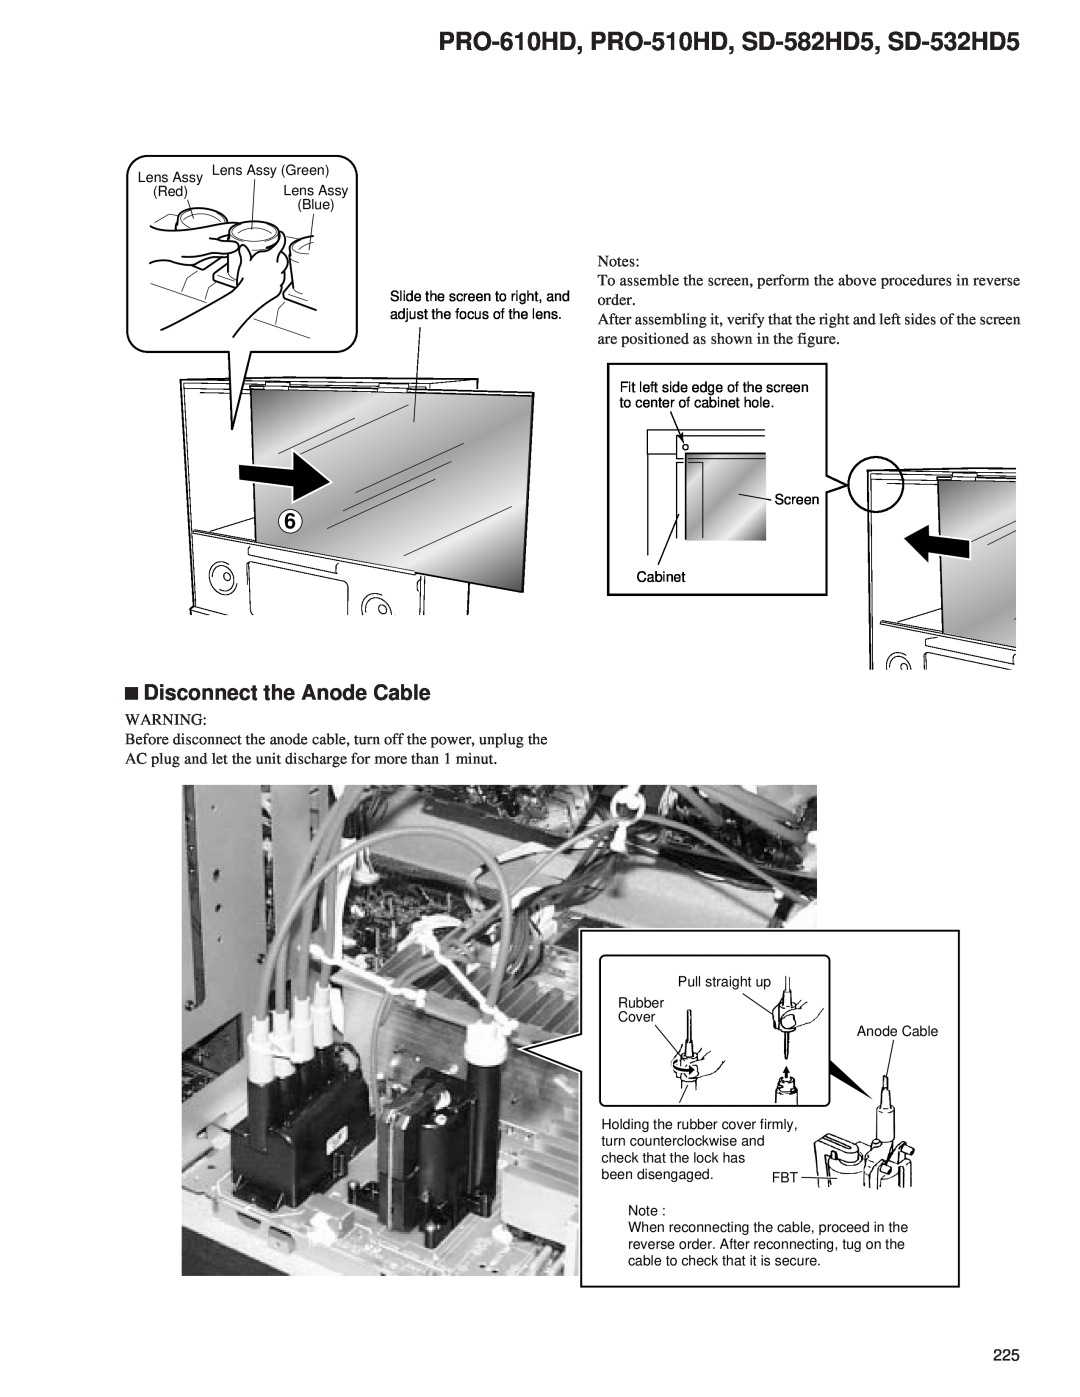 Pioneer service manual Disconnect the Anode Cable, PRO-610HD, PRO-510HD, SD-582HD5, SD-532HD5 